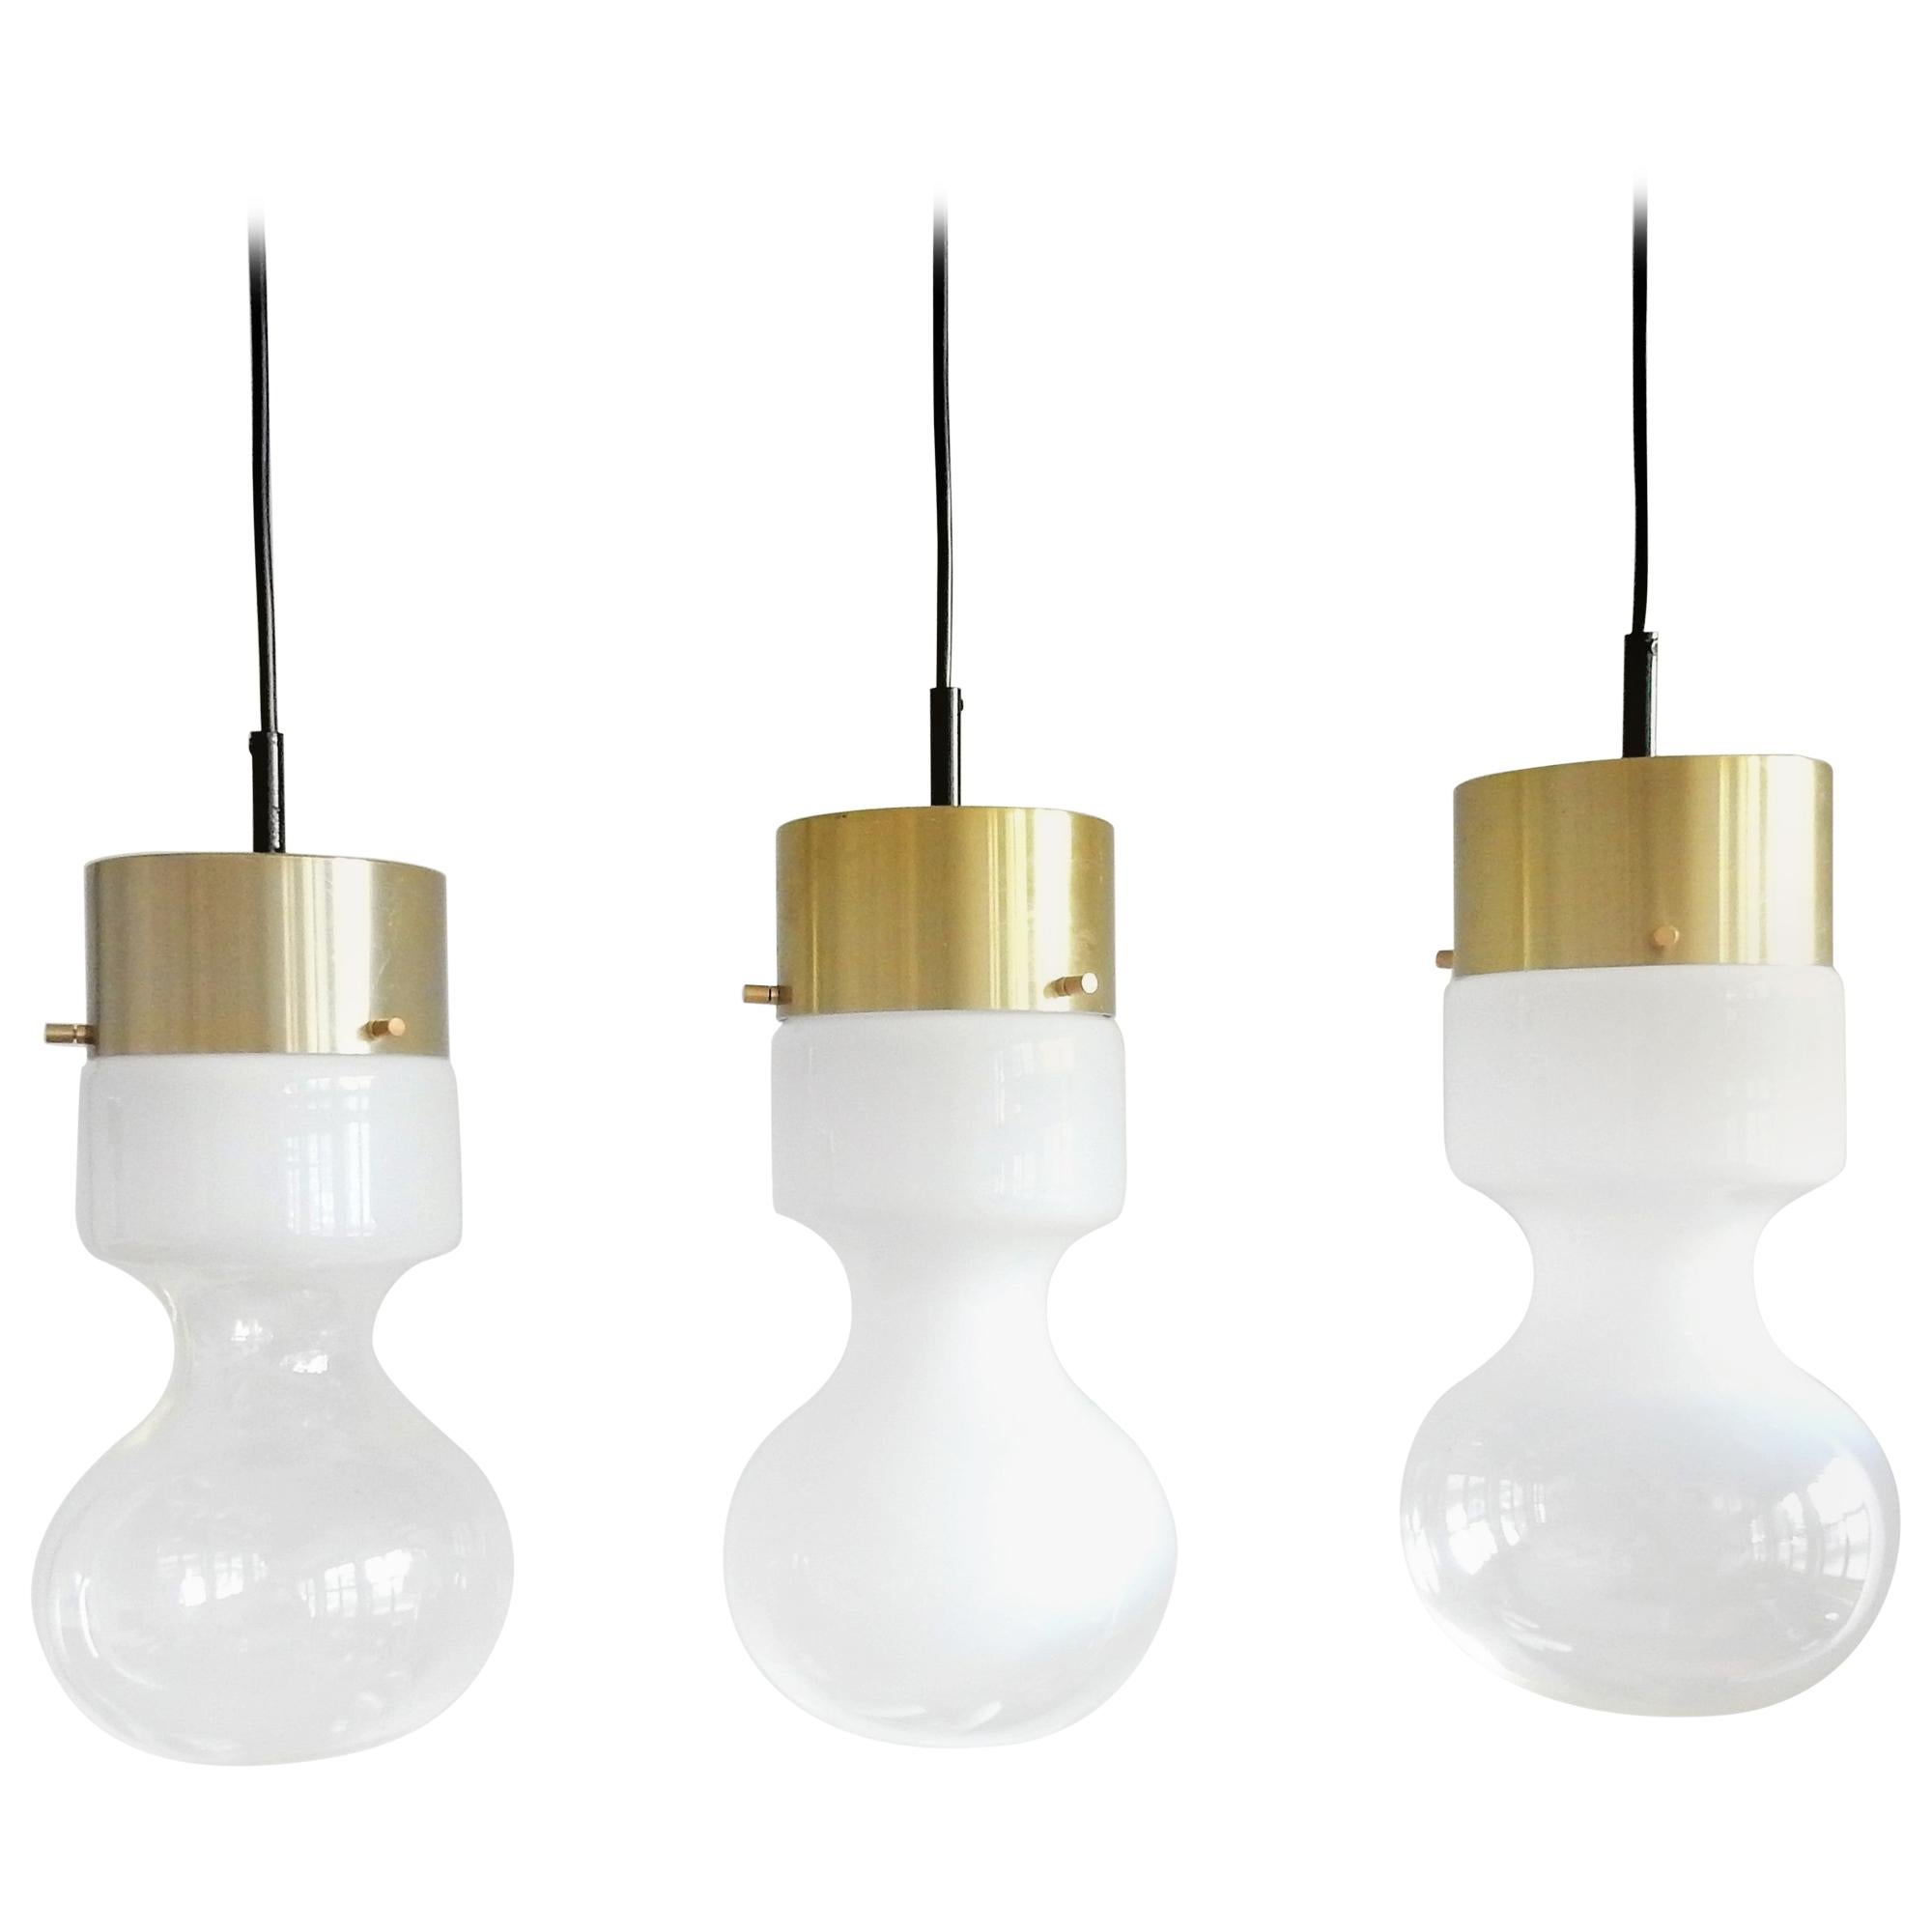 Set of 3 'Weerballon' B-1062 Pendant Lamps by RAAK, 1970s The Netherlands